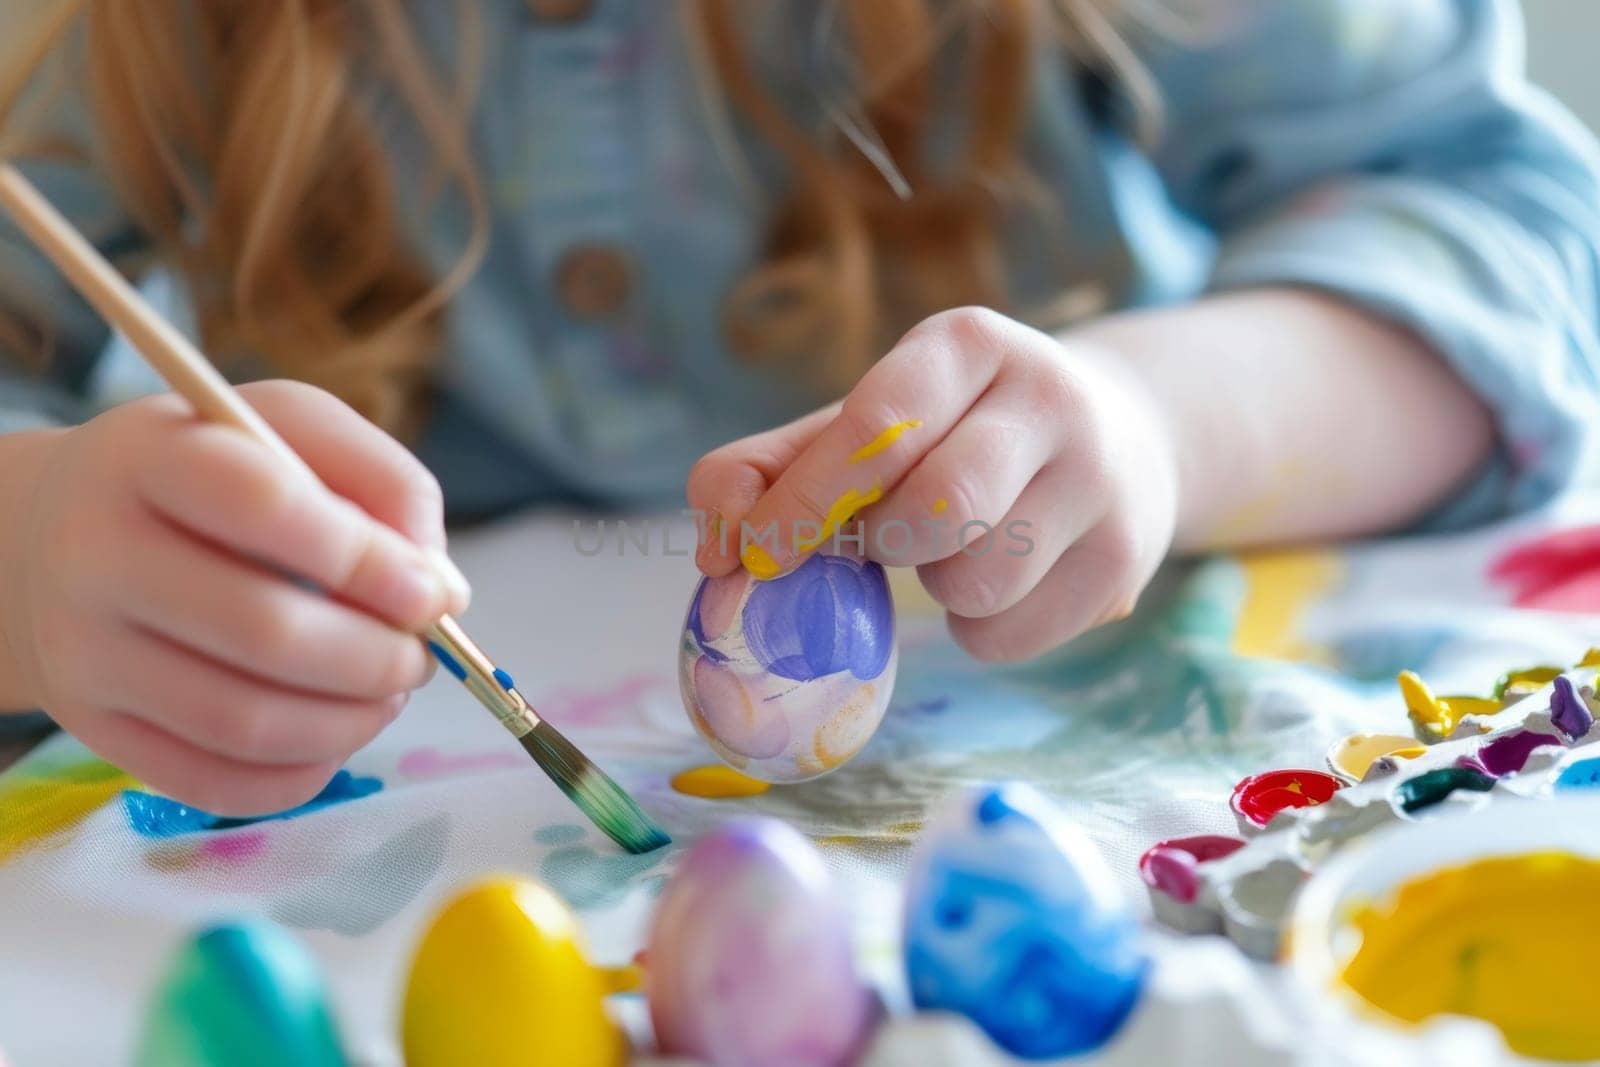 A young girl is painting a yellow and blue egg. She is using a brush to apply the paint